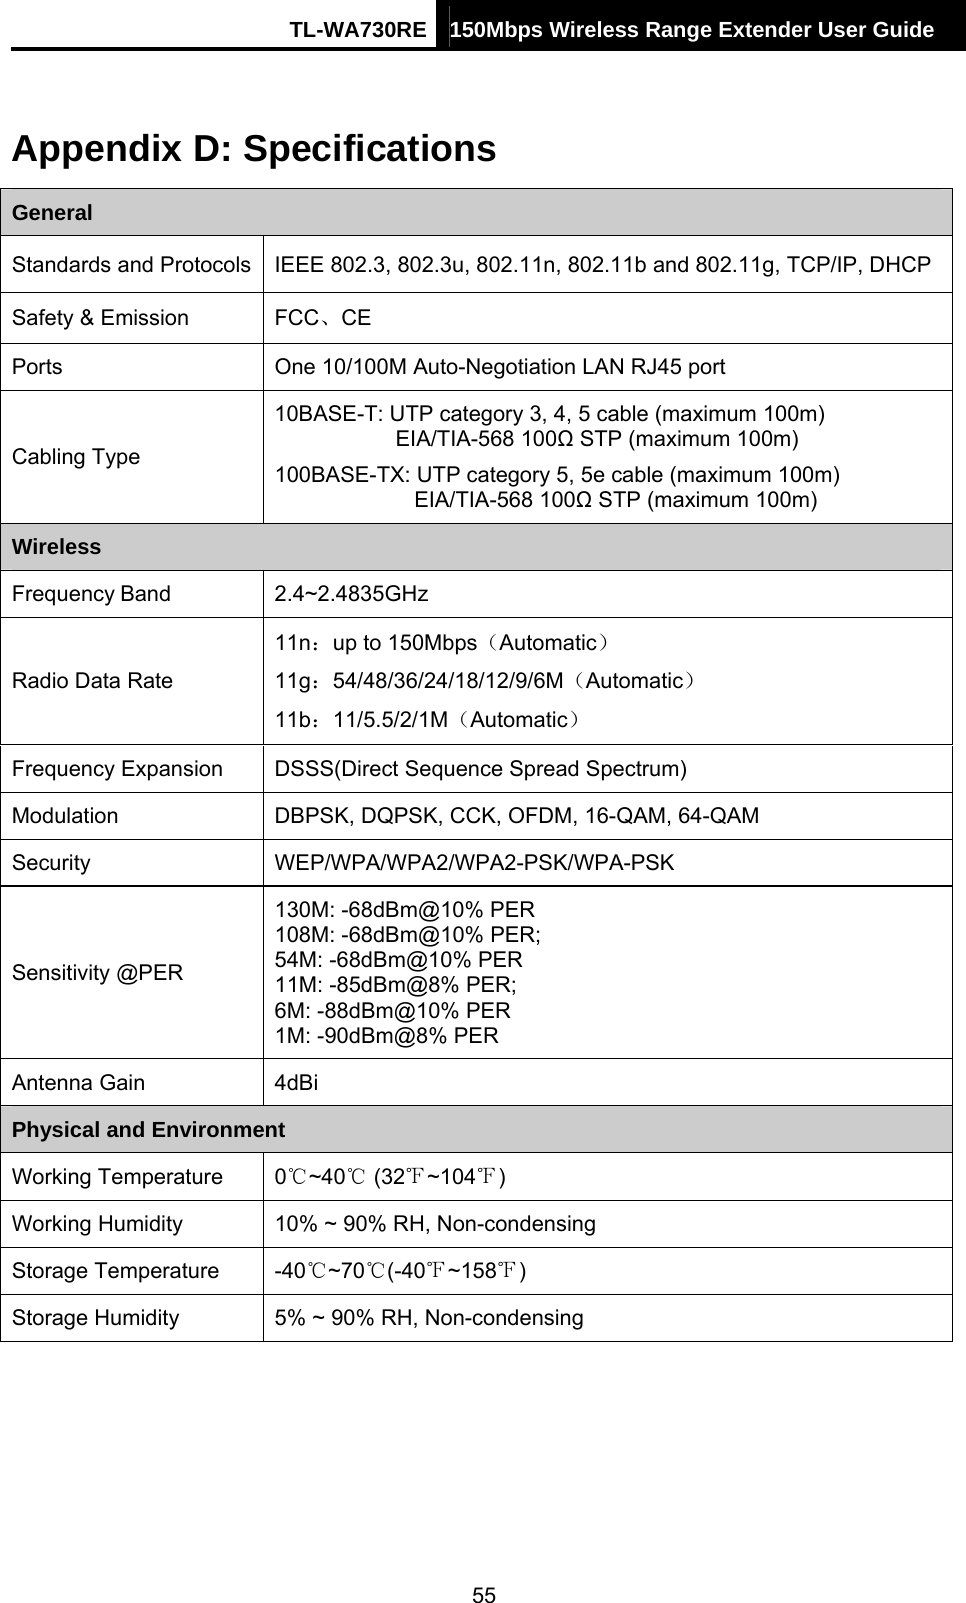 TL-WA730RE 150Mbps Wireless Range Extender User Guide  Appendix D: Specifications General Standards and Protocols  IEEE 802.3, 802.3u, 802.11n, 802.11b and 802.11g, TCP/IP, DHCP Safety &amp; Emission  FCC、CE Ports  One 10/100M Auto-Negotiation LAN RJ45 port Cabling Type 10BASE-T: UTP category 3, 4, 5 cable (maximum 100m) EIA/TIA-568 100Ω STP (maximum 100m) 100BASE-TX: UTP category 5, 5e cable (maximum 100m) EIA/TIA-568 100Ω STP (maximum 100m) Wireless Frequency Band 2.4~2.4835GHz Radio Data Rate 11n：up to 150Mbps（Automatic） 11g：54/48/36/24/18/12/9/6M（Automatic） 11b：11/5.5/2/1M（Automatic） Frequency Expansion  DSSS(Direct Sequence Spread Spectrum) Modulation  DBPSK, DQPSK, CCK, OFDM, 16-QAM, 64-QAM Security WEP/WPA/WPA2/WPA2-PSK/WPA-PSK Sensitivity @PER 130M: -68dBm@10% PER 108M: -68dBm@10% PER;   54M: -68dBm@10% PER 11M: -85dBm@8% PER;   6M: -88dBm@10% PER 1M: -90dBm@8% PER Antenna Gain  4dBi Physical and Environment Working Temperature 0℃~40  (32℃~1℉04℉) Working Humidity  10% ~ 90% RH, Non-condensing Storage Temperature  -40 ~70 (℃℃-40 ~158℉)℉ Storage Humidity  5% ~ 90% RH, Non-condensing  55 